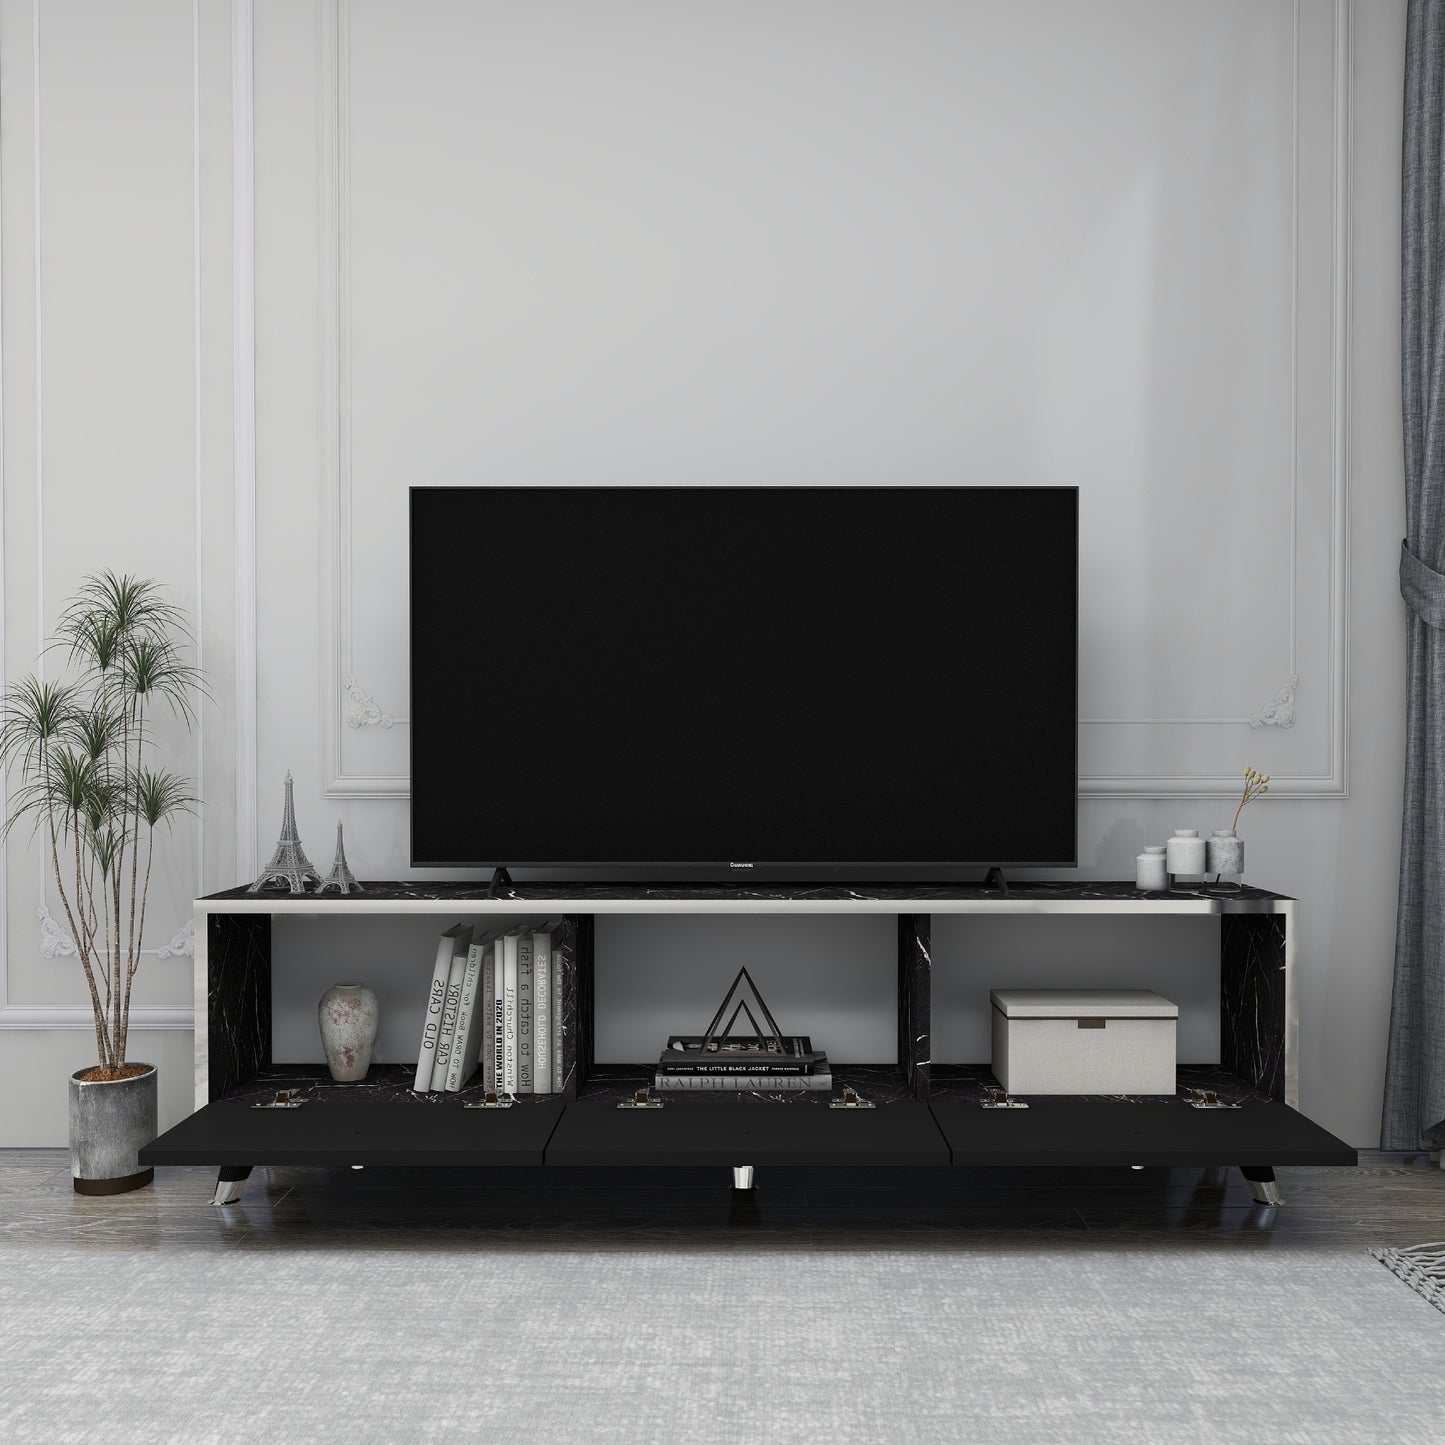 Esmera 150 cm Wide TV Stand and Media Console with Cabinets